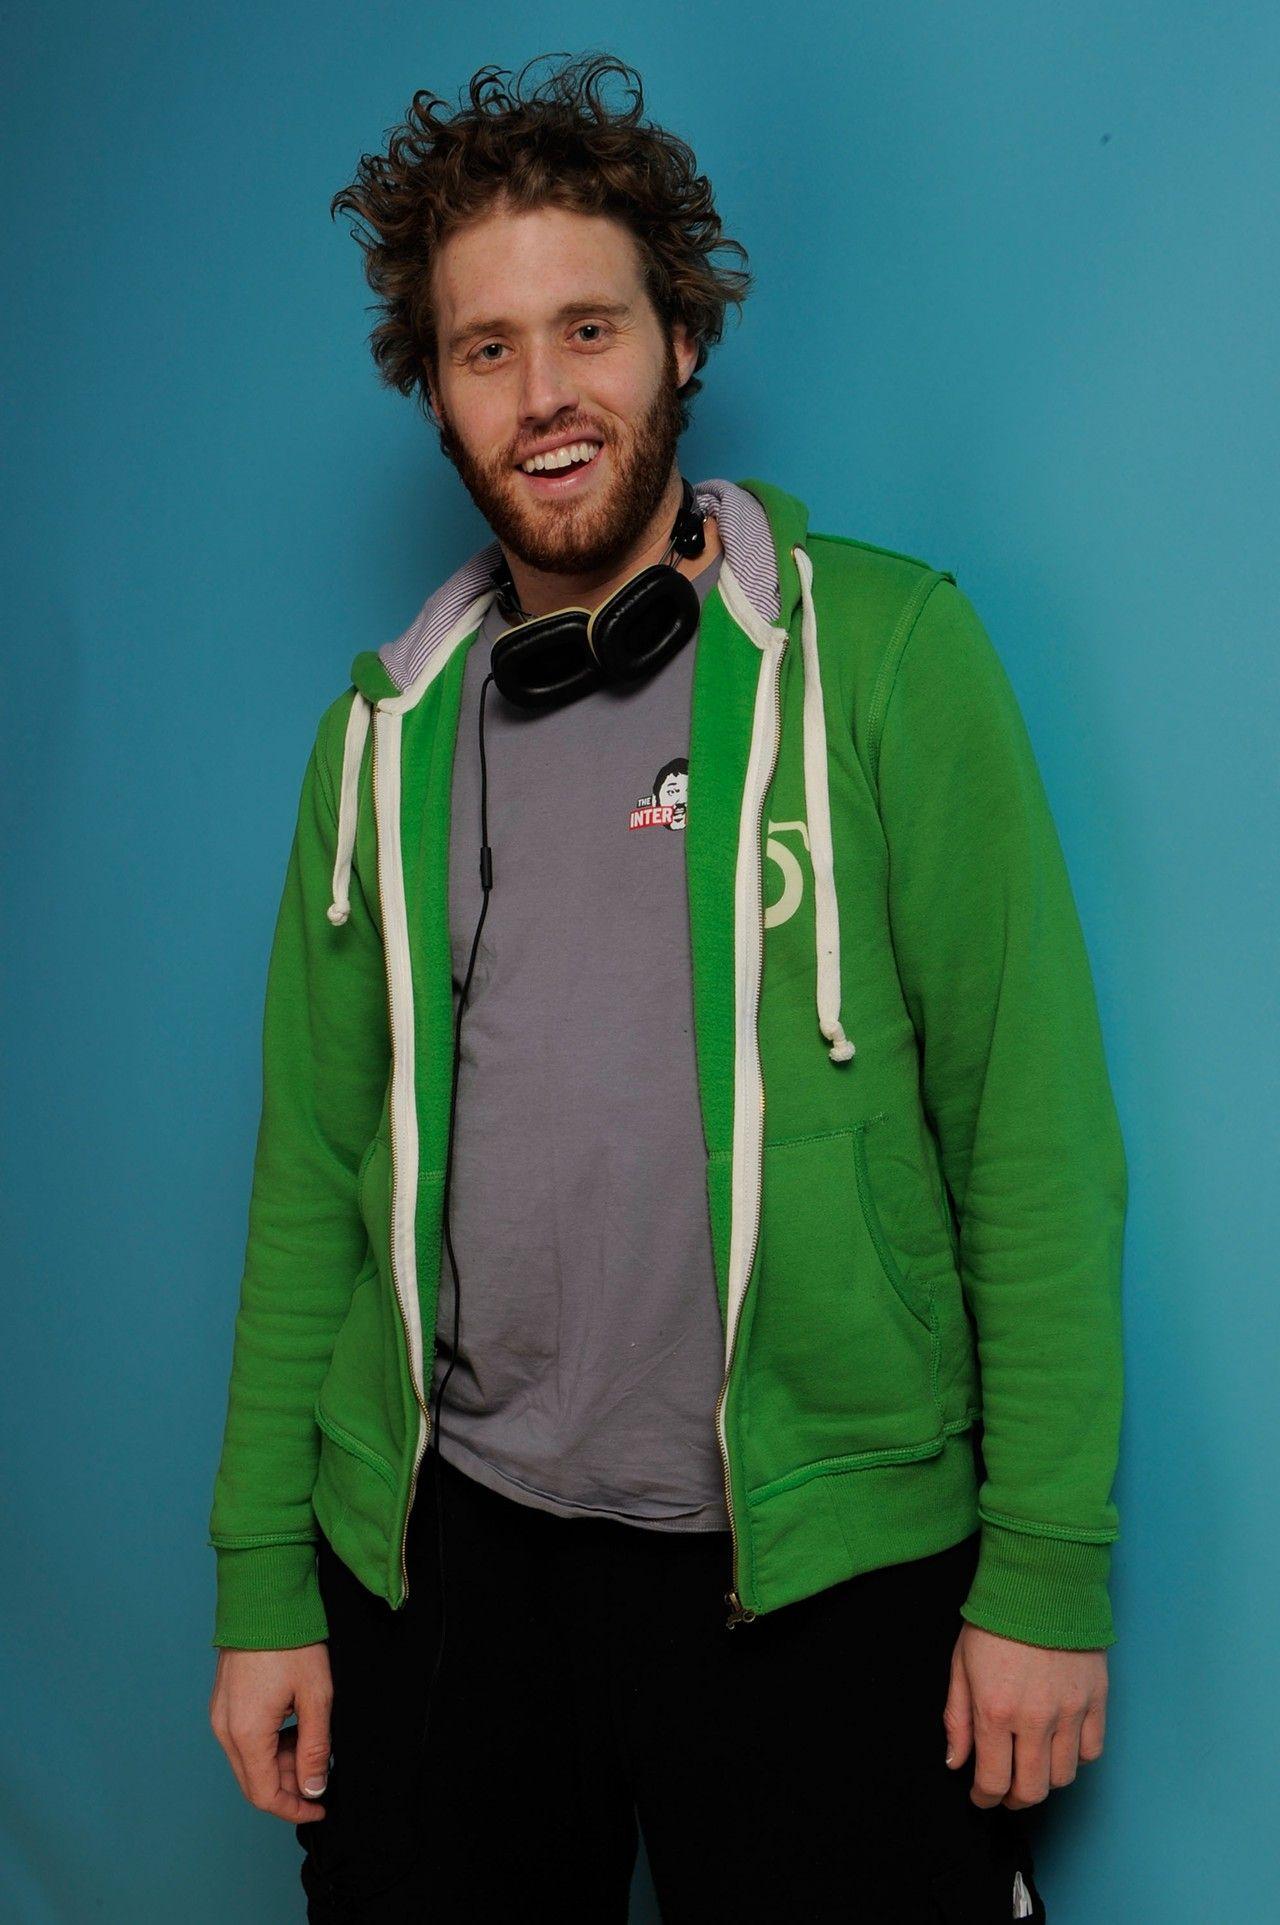 T.J. Miller Image HD. Full HD Picture